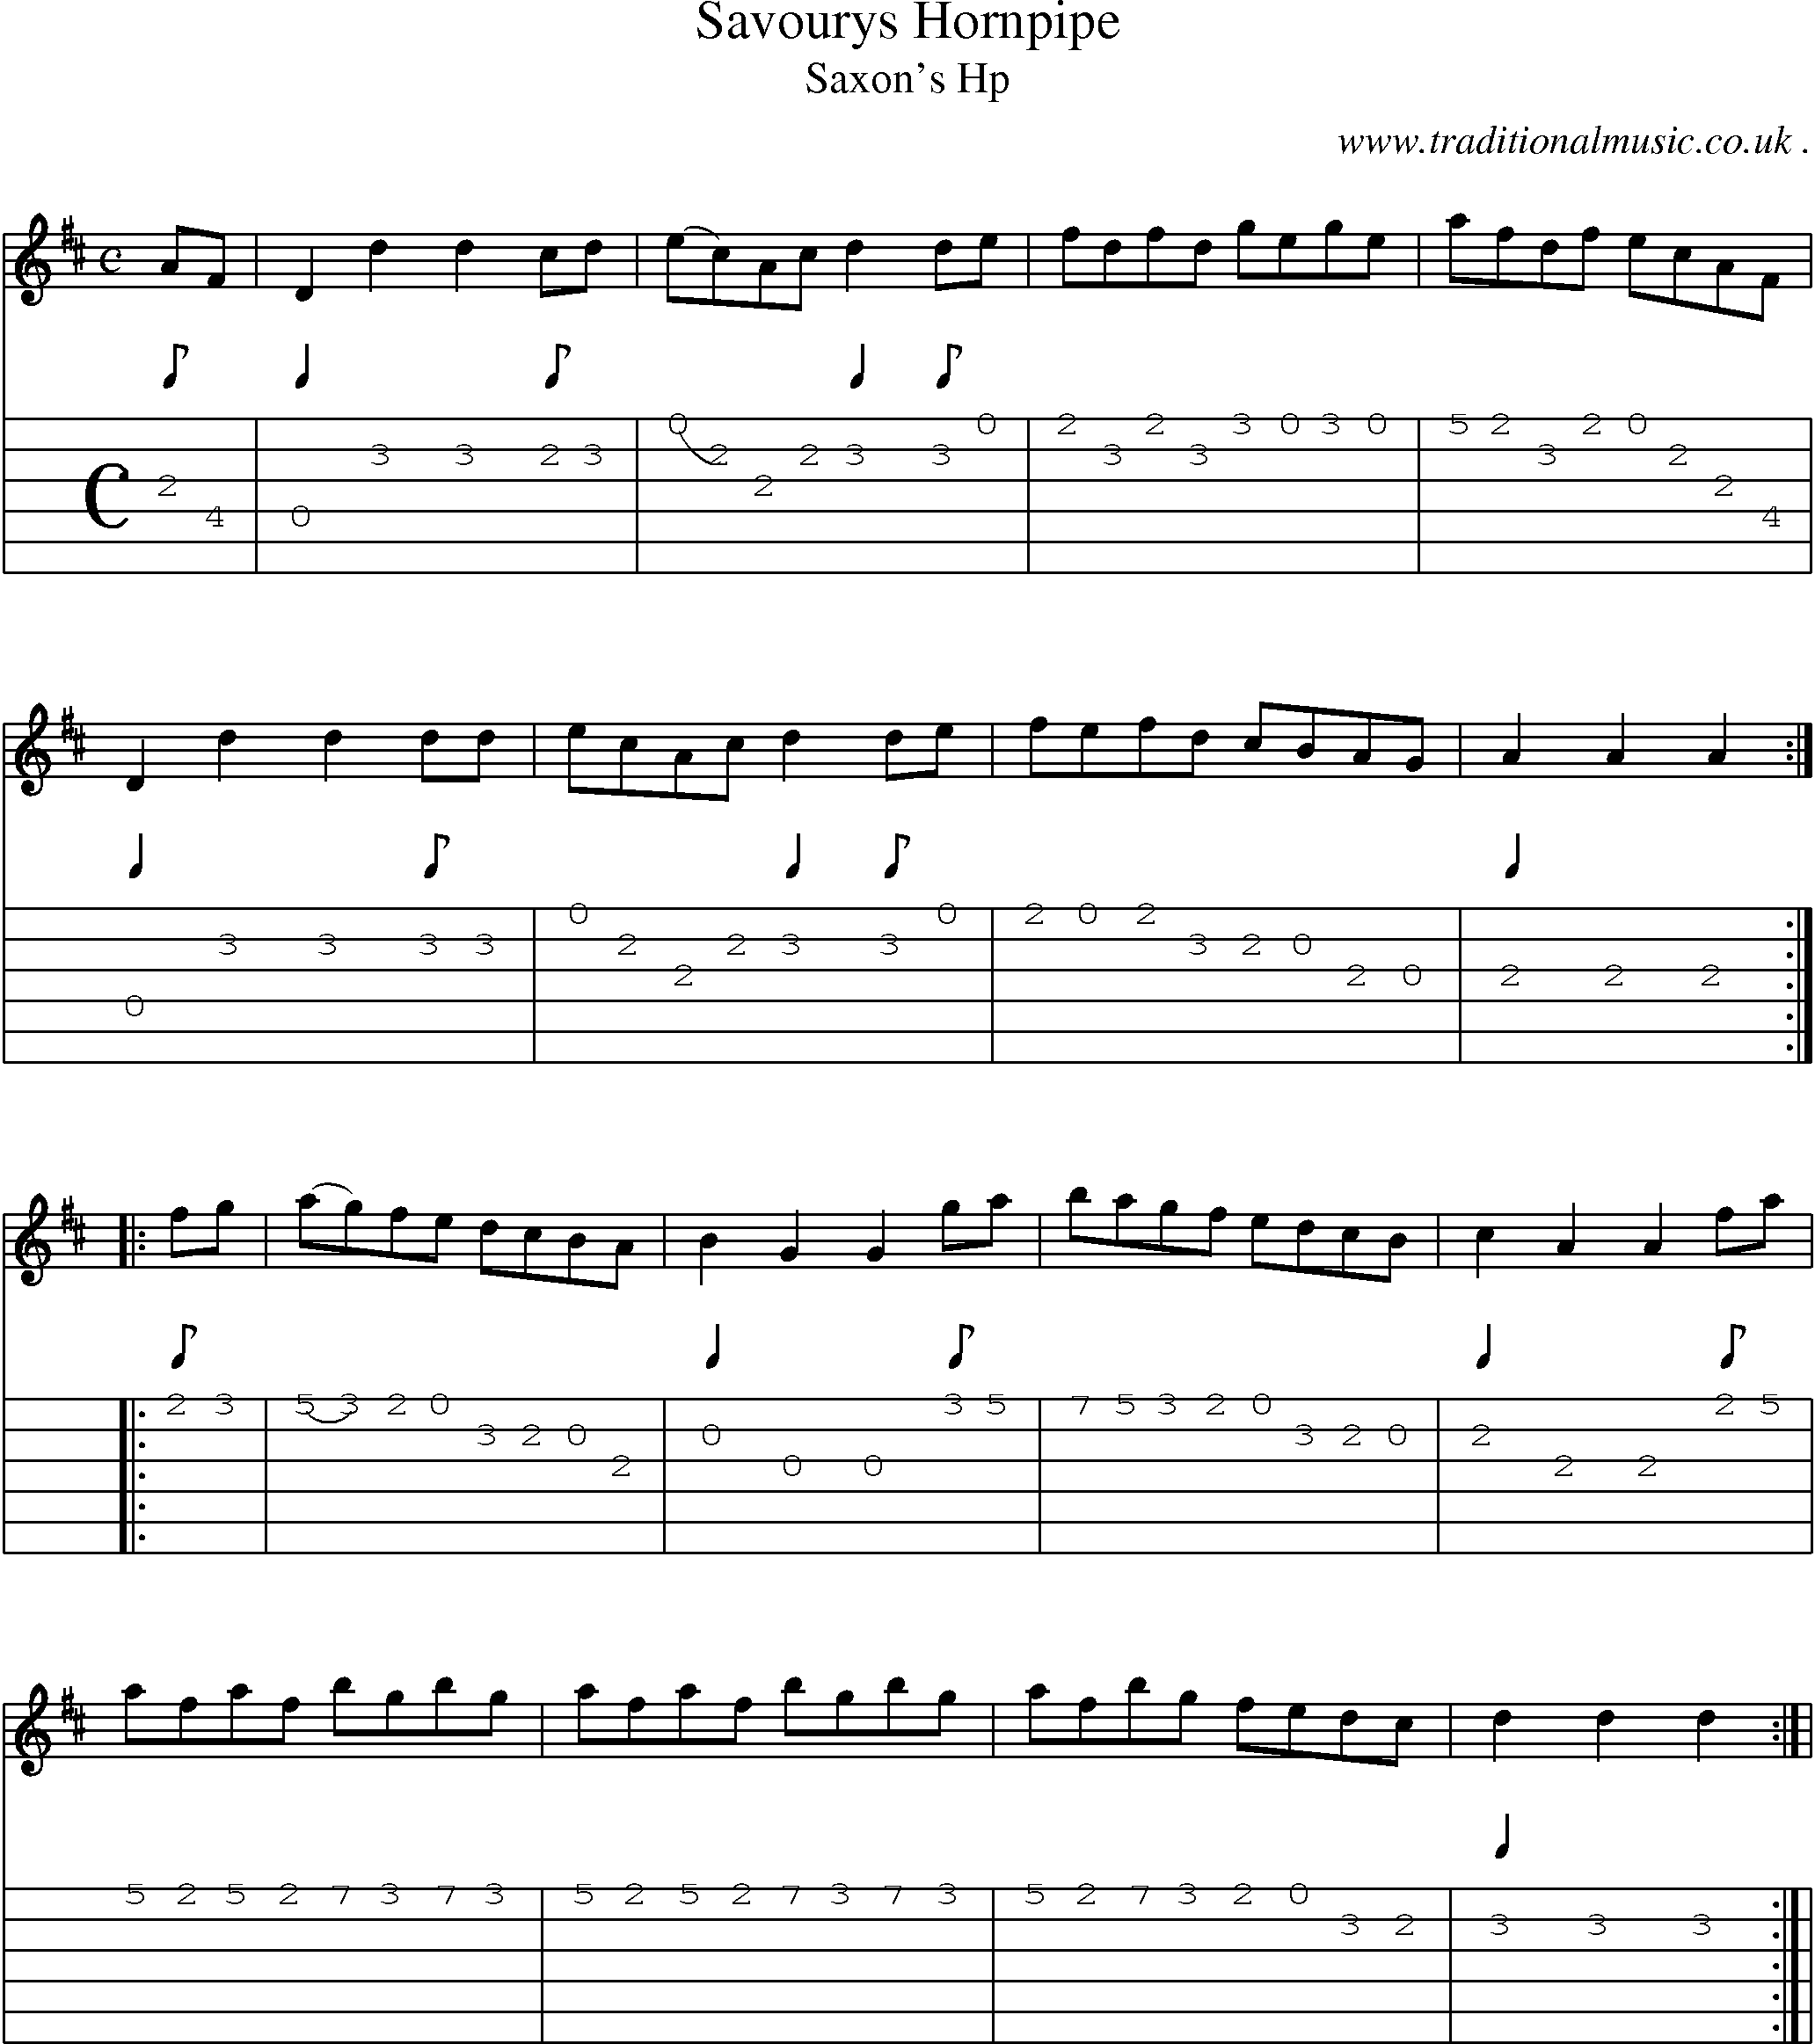 Sheet-Music and Guitar Tabs for Savourys Hornpipe